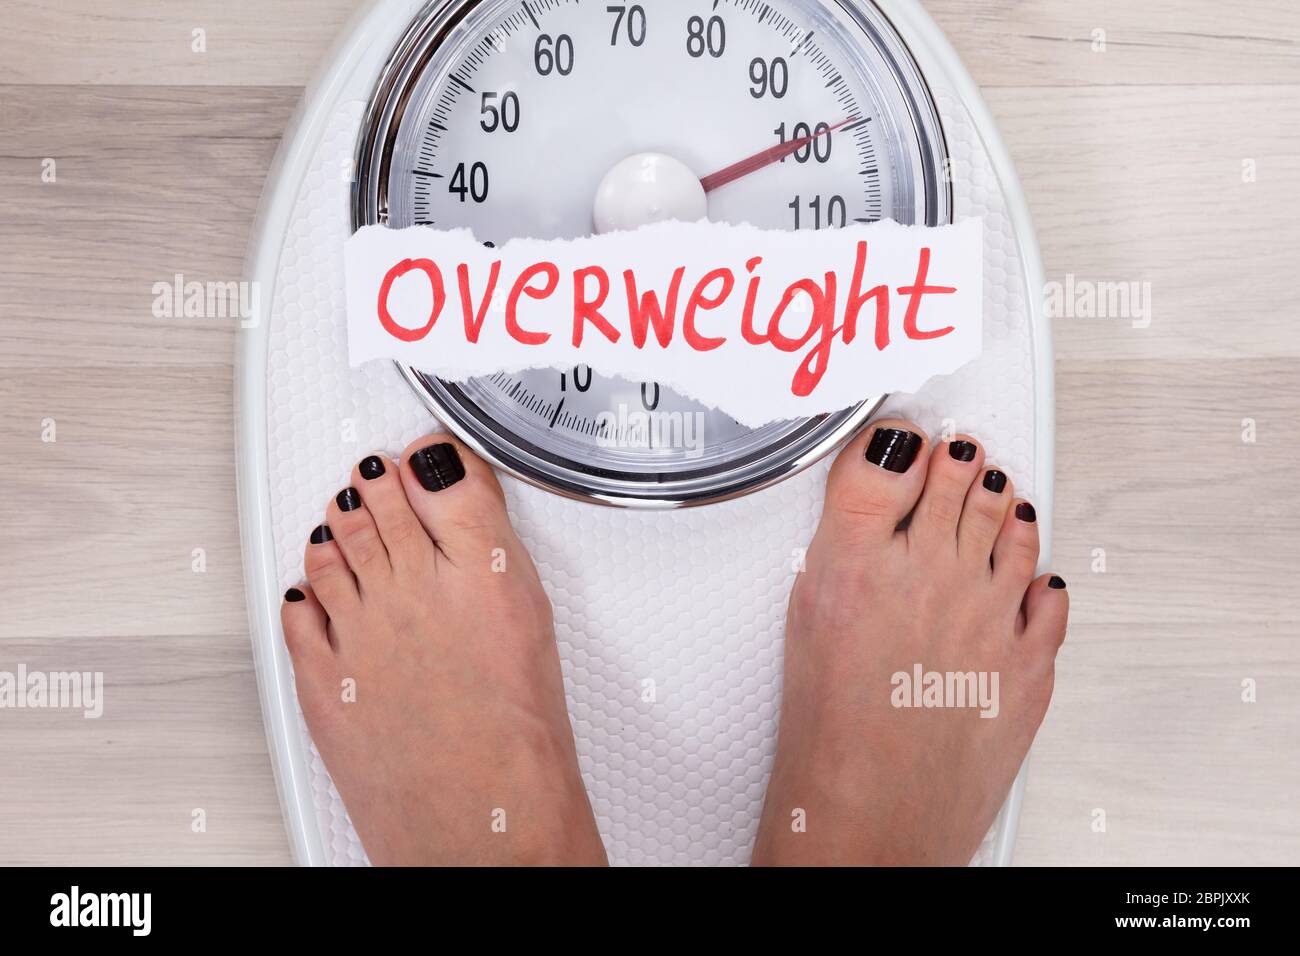 Close-up Of Woman's Feet On Weighing Scale Indicating Overweight Stock Photo